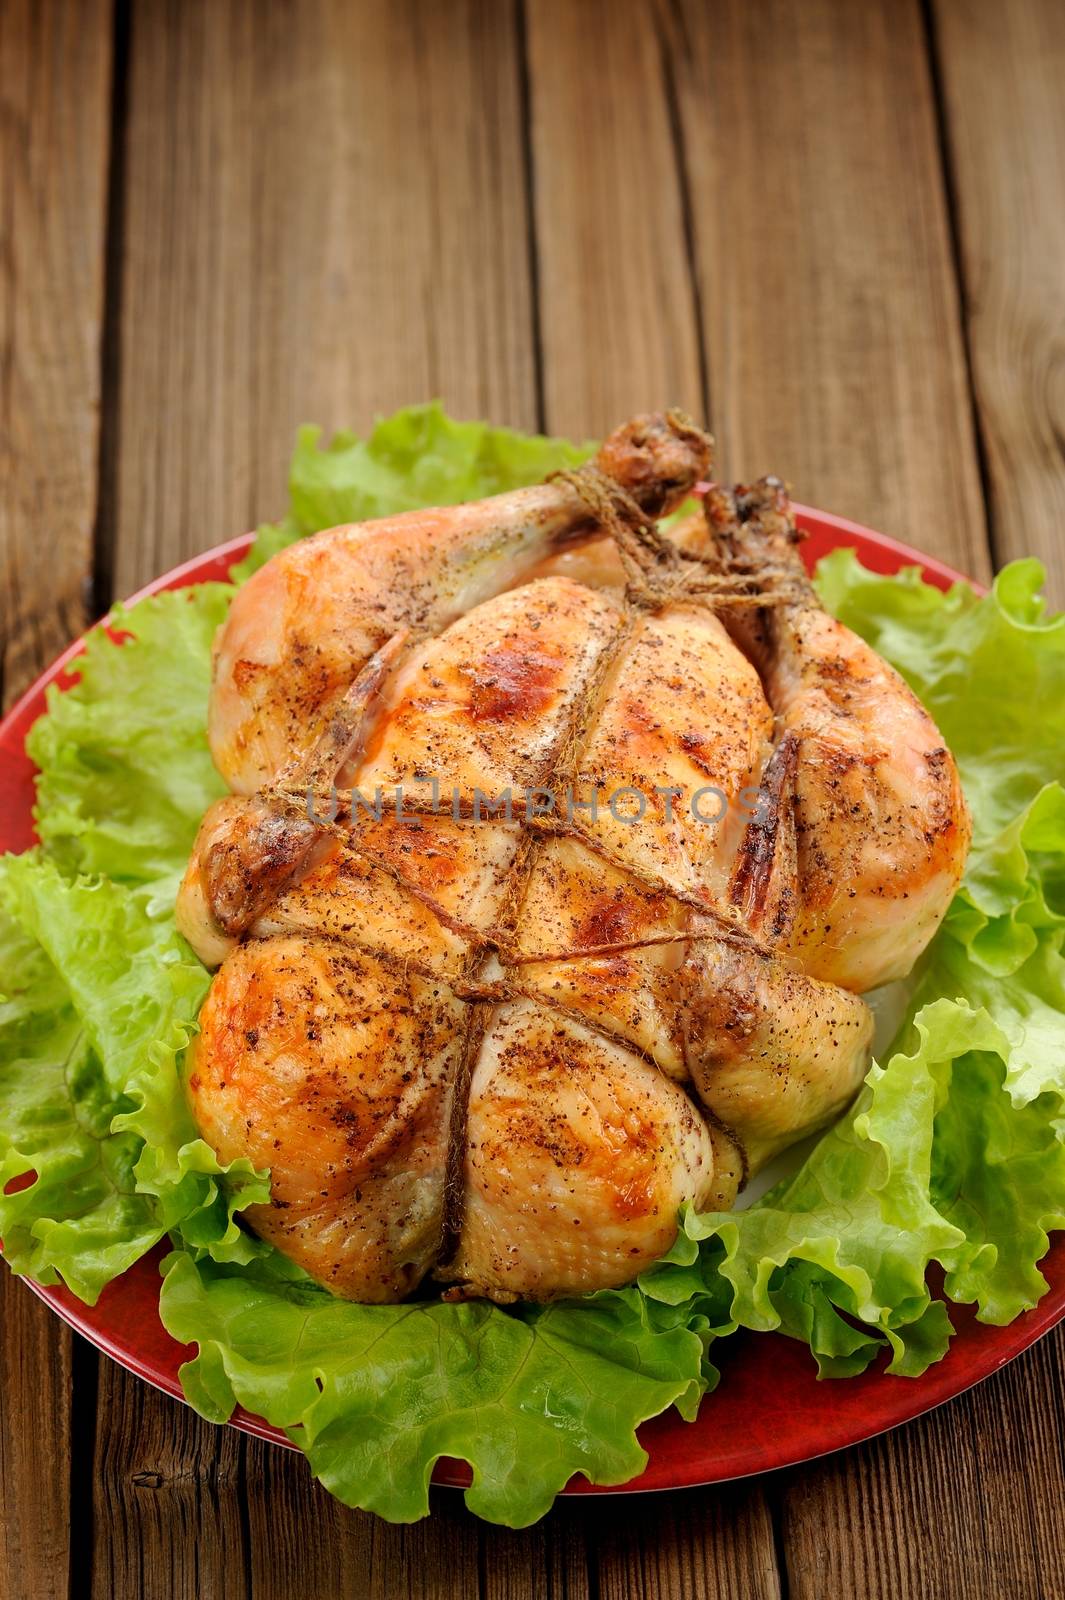 Bondage shibari roasted chicken with salad leaves on red plate on wooden background with space vertical